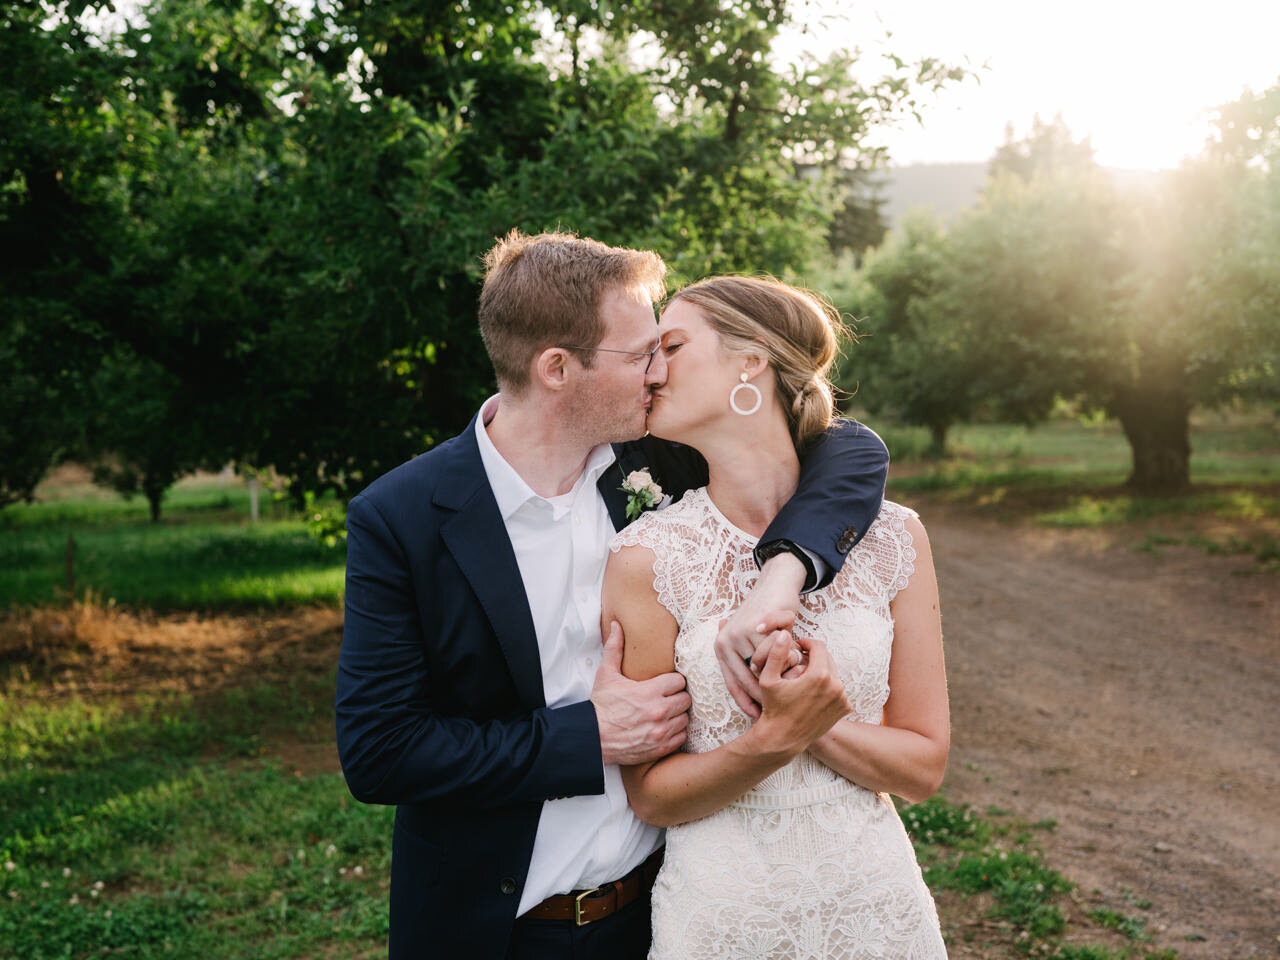  Bride with lace dress and groom kiss in sunlight orchards 